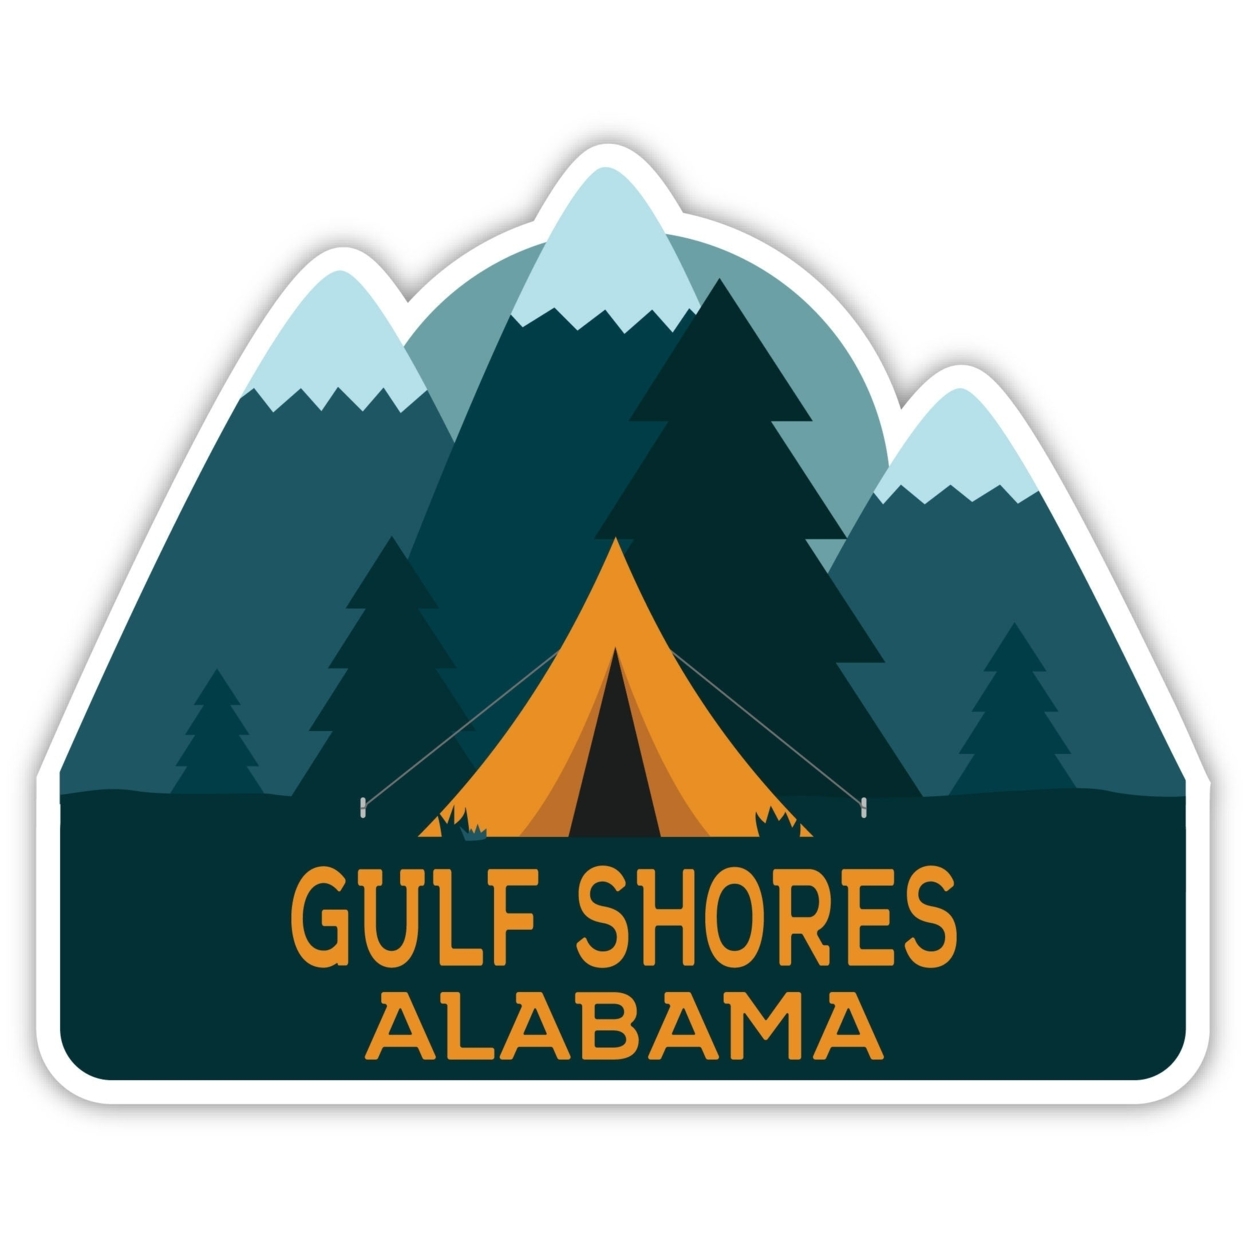 Gulf Shores Alabama Souvenir Decorative Stickers (Choose Theme And Size) - Single Unit, 10-Inch, Great Outdoors